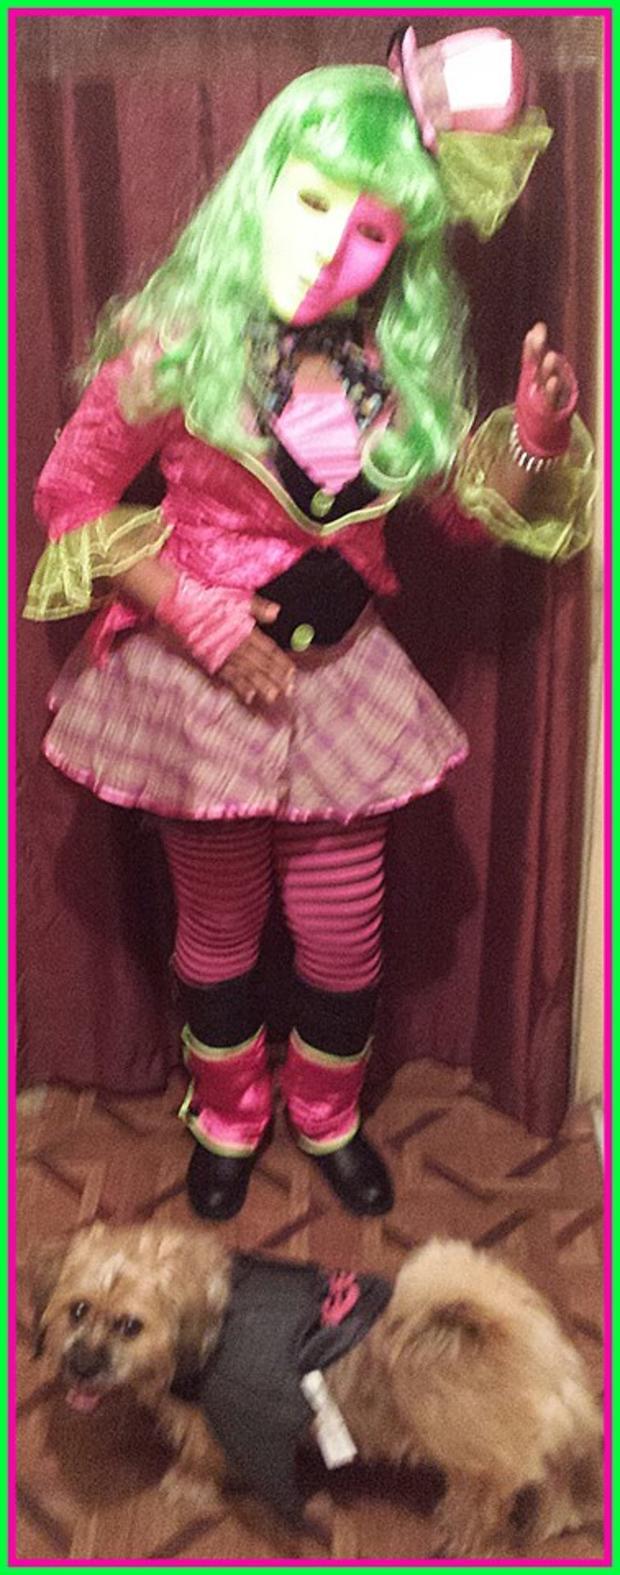 my-granddaughter-precious-and-her-puppy-pumpkin-dressed-for-halloween-2014-from-blondia-reynolds.jpg 